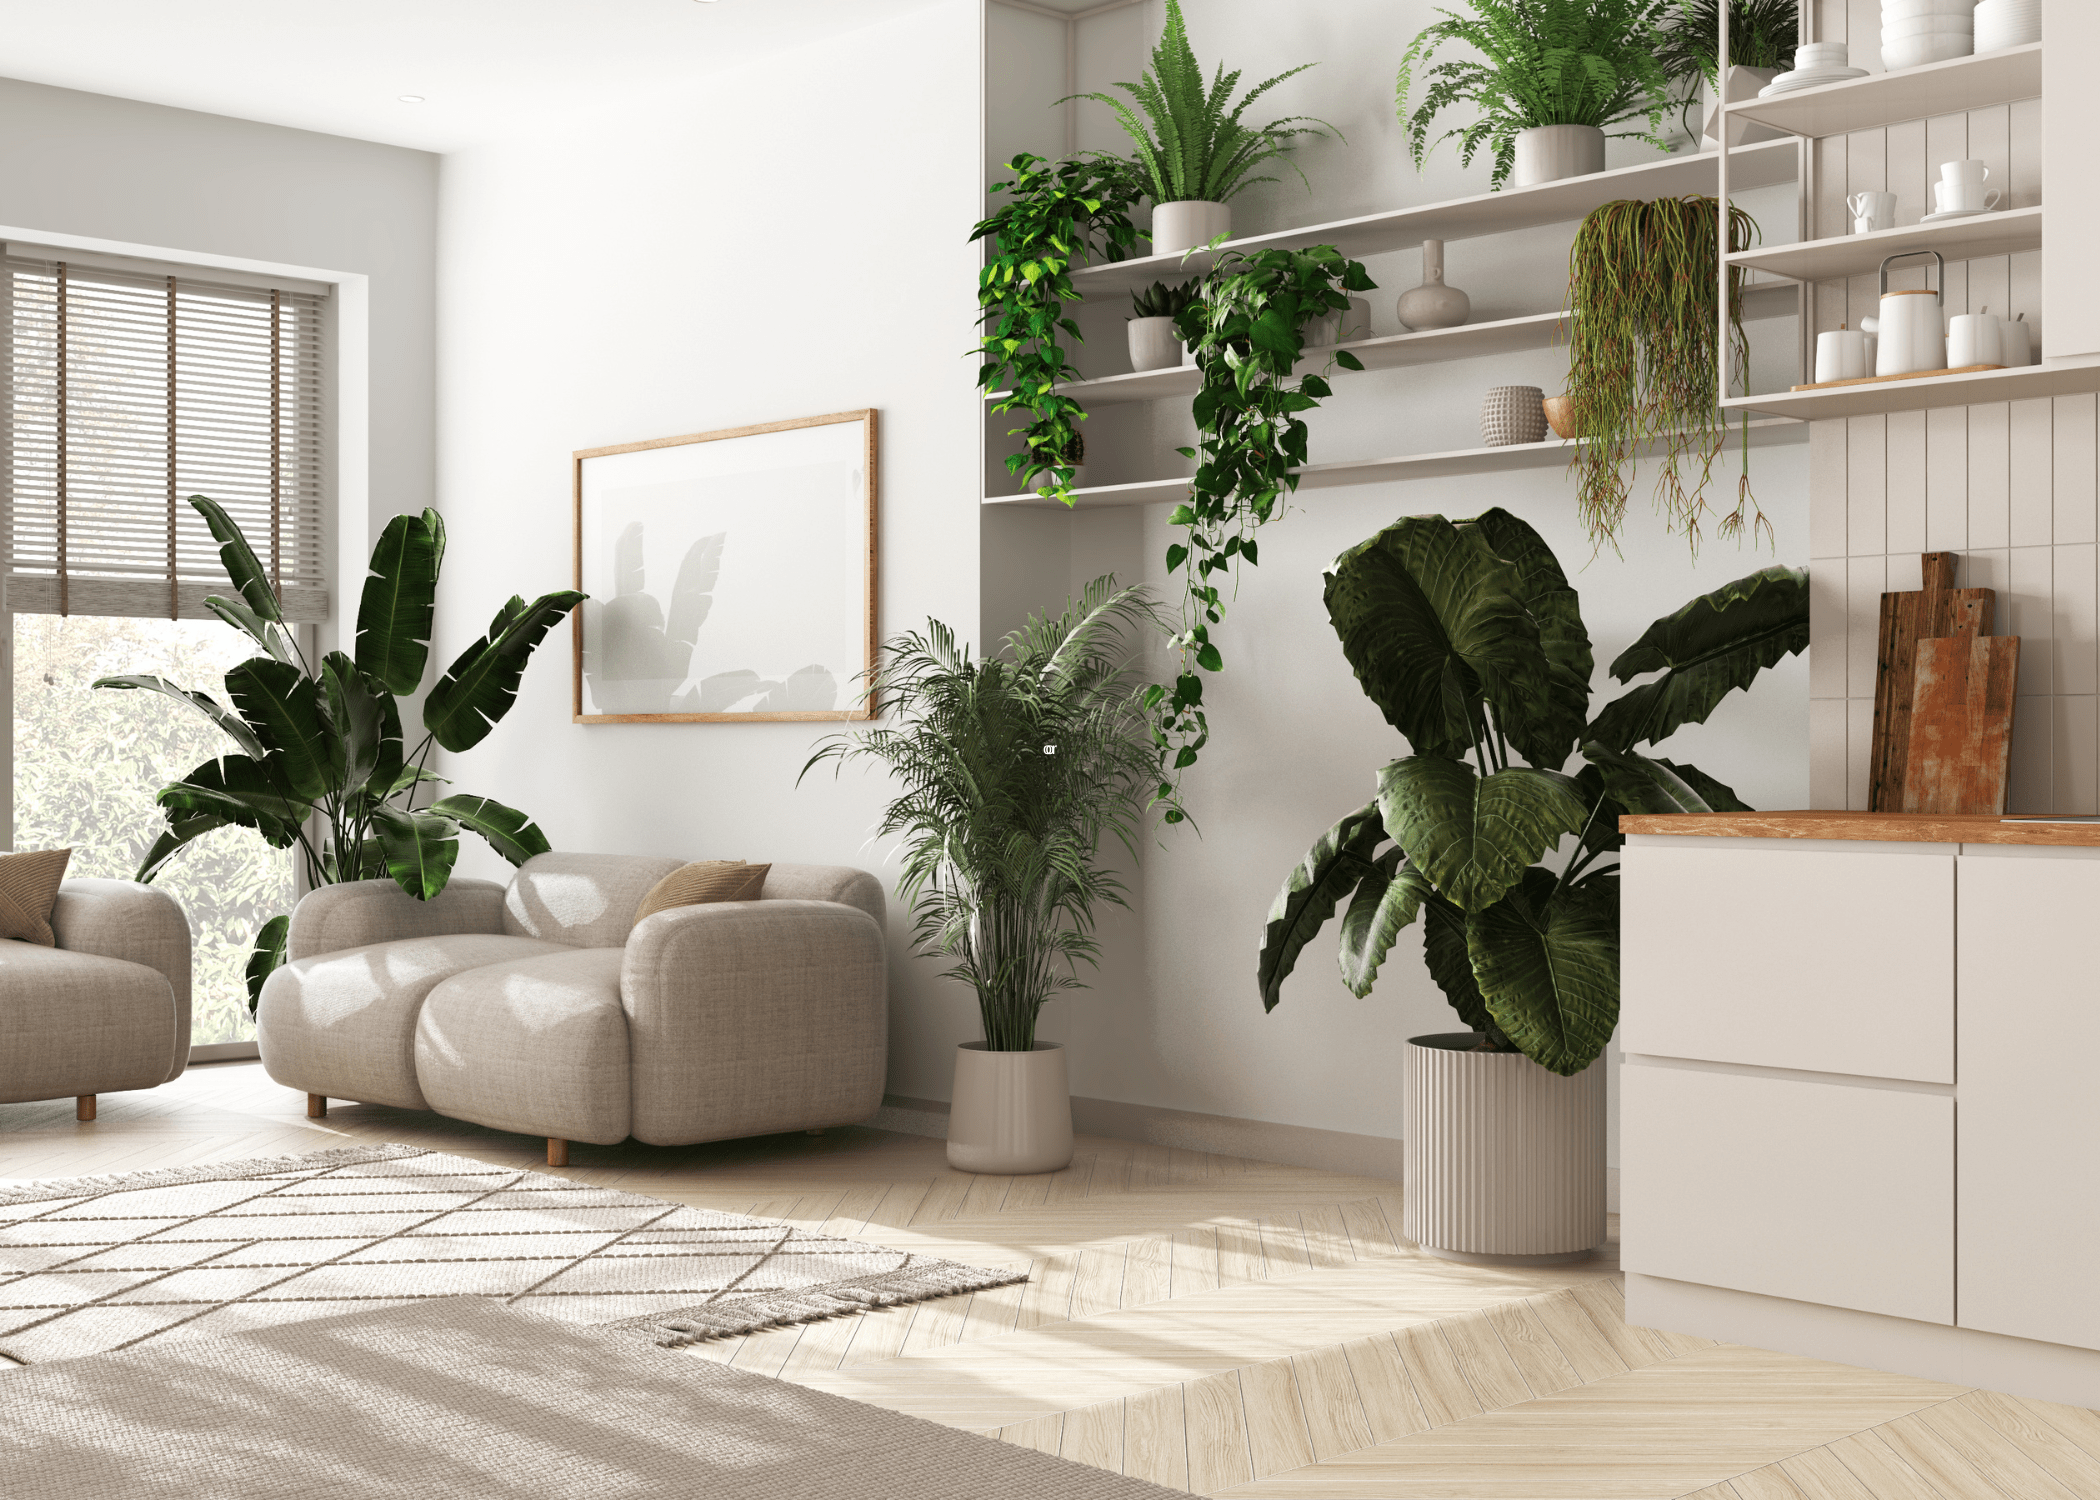 living area with greenery and tons of plants